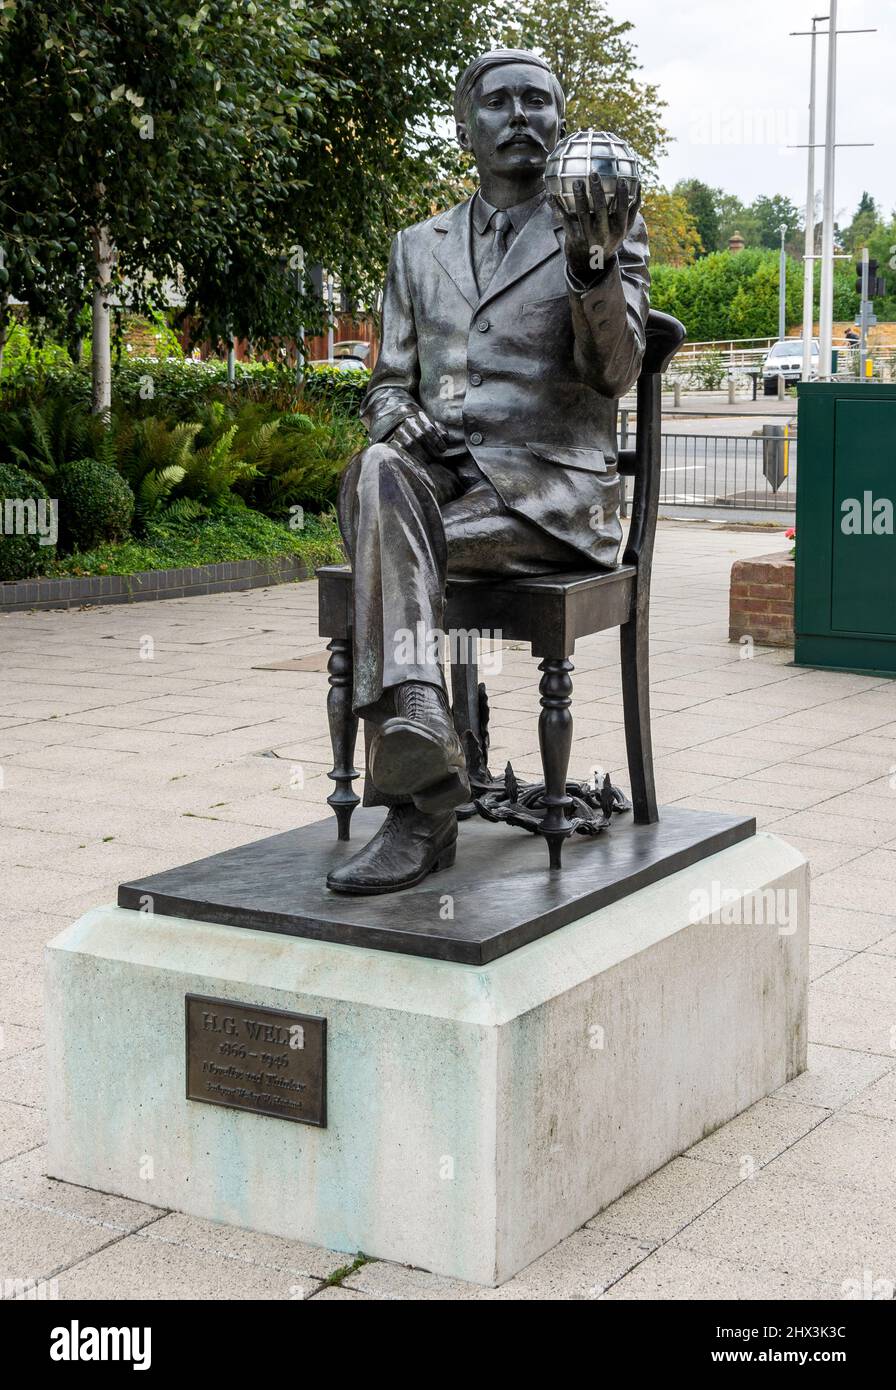 Sculpture of H. G. Wells by sculptor Wesley W. Harland on display outside the McLaren Group building, Victoria Gate, Woking, England, UK Stock Photo